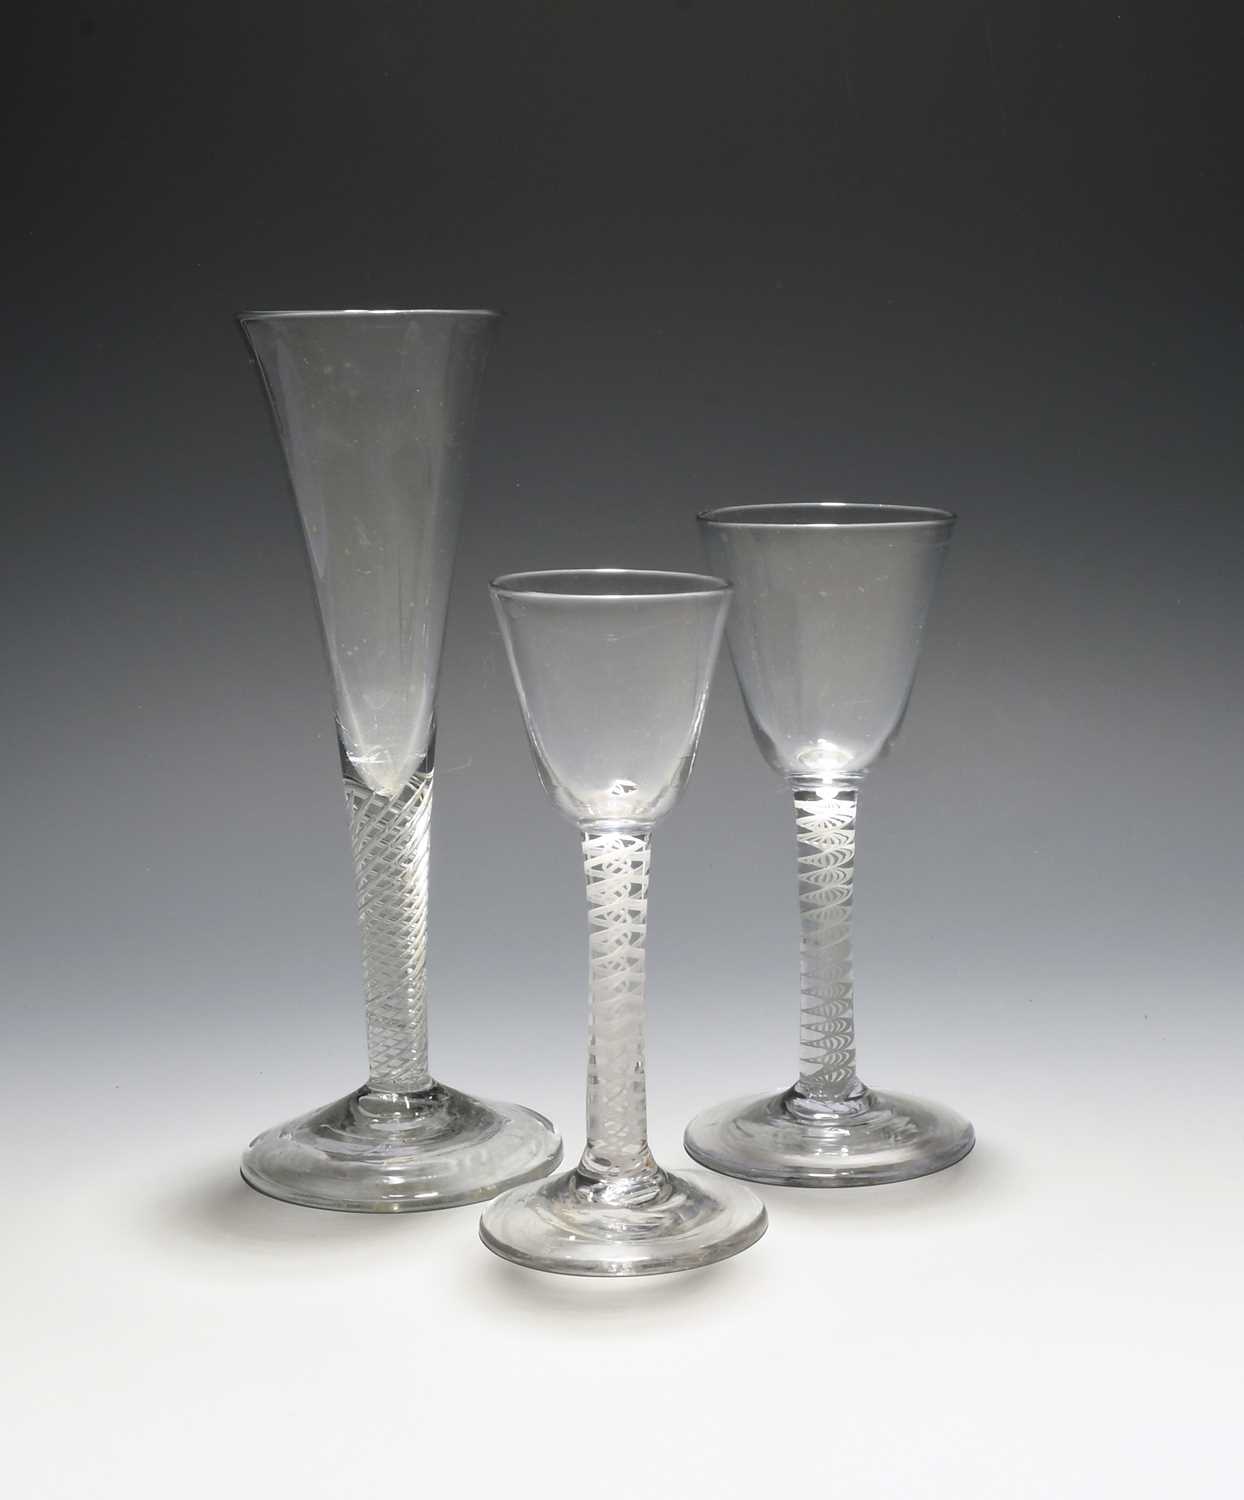 Two wine glasses and an ale flute, c.1750-60, the wines with round funnel bowls on multiseries